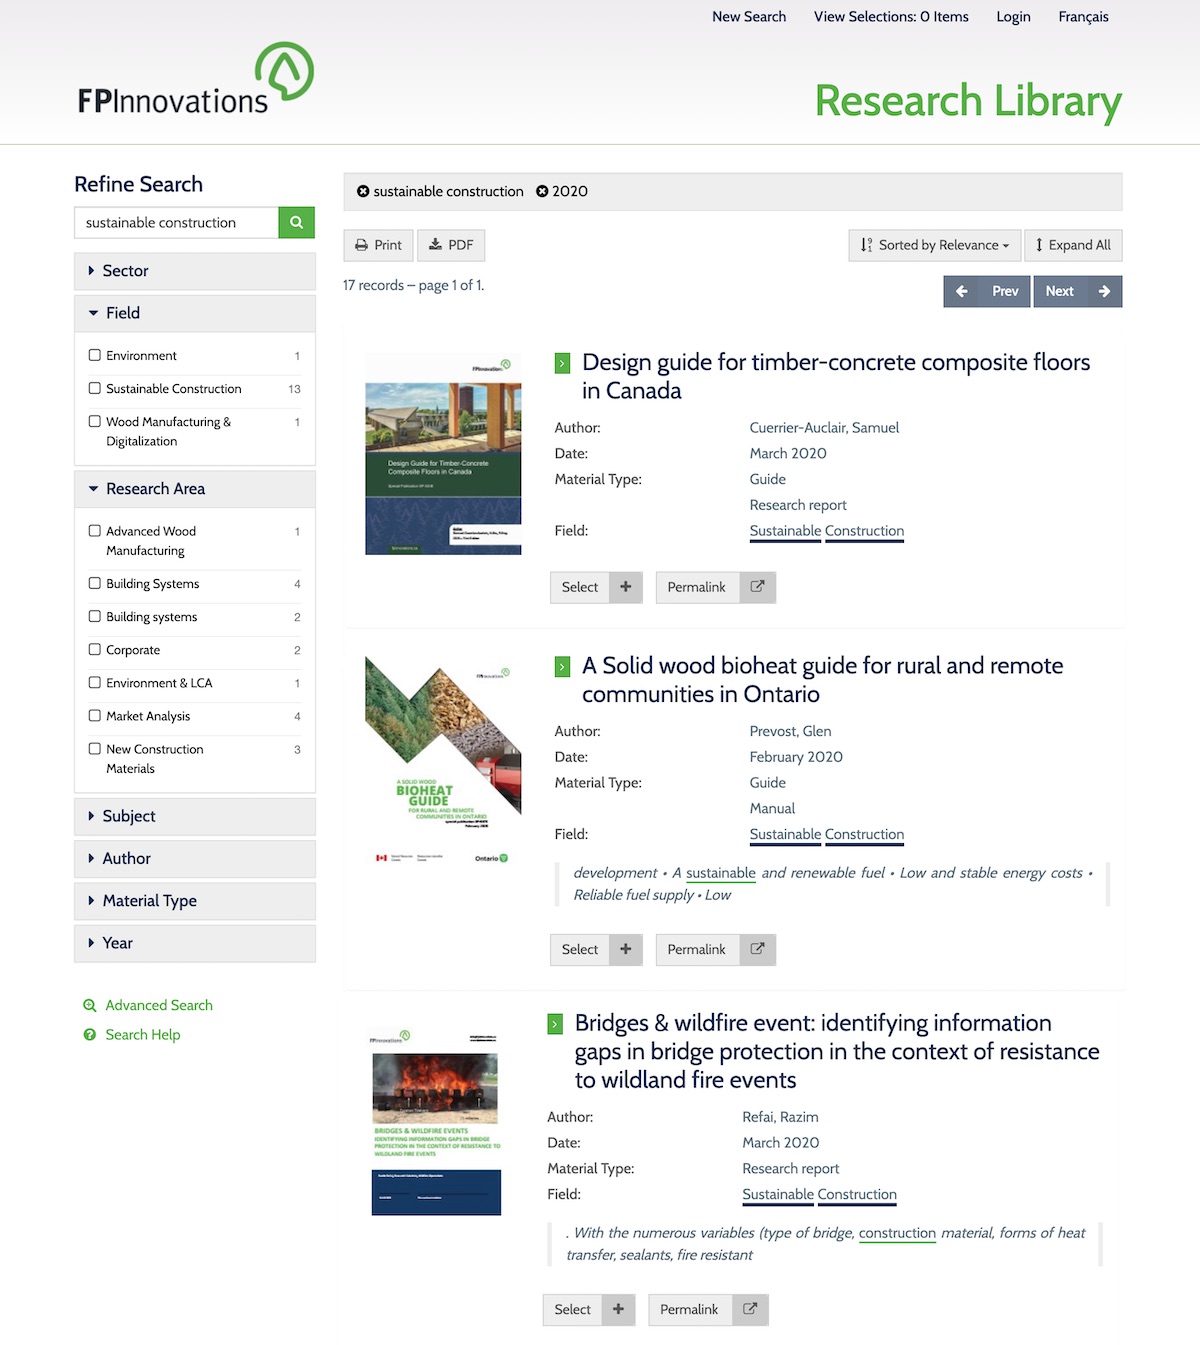 FPInnovations Research Library Search Results